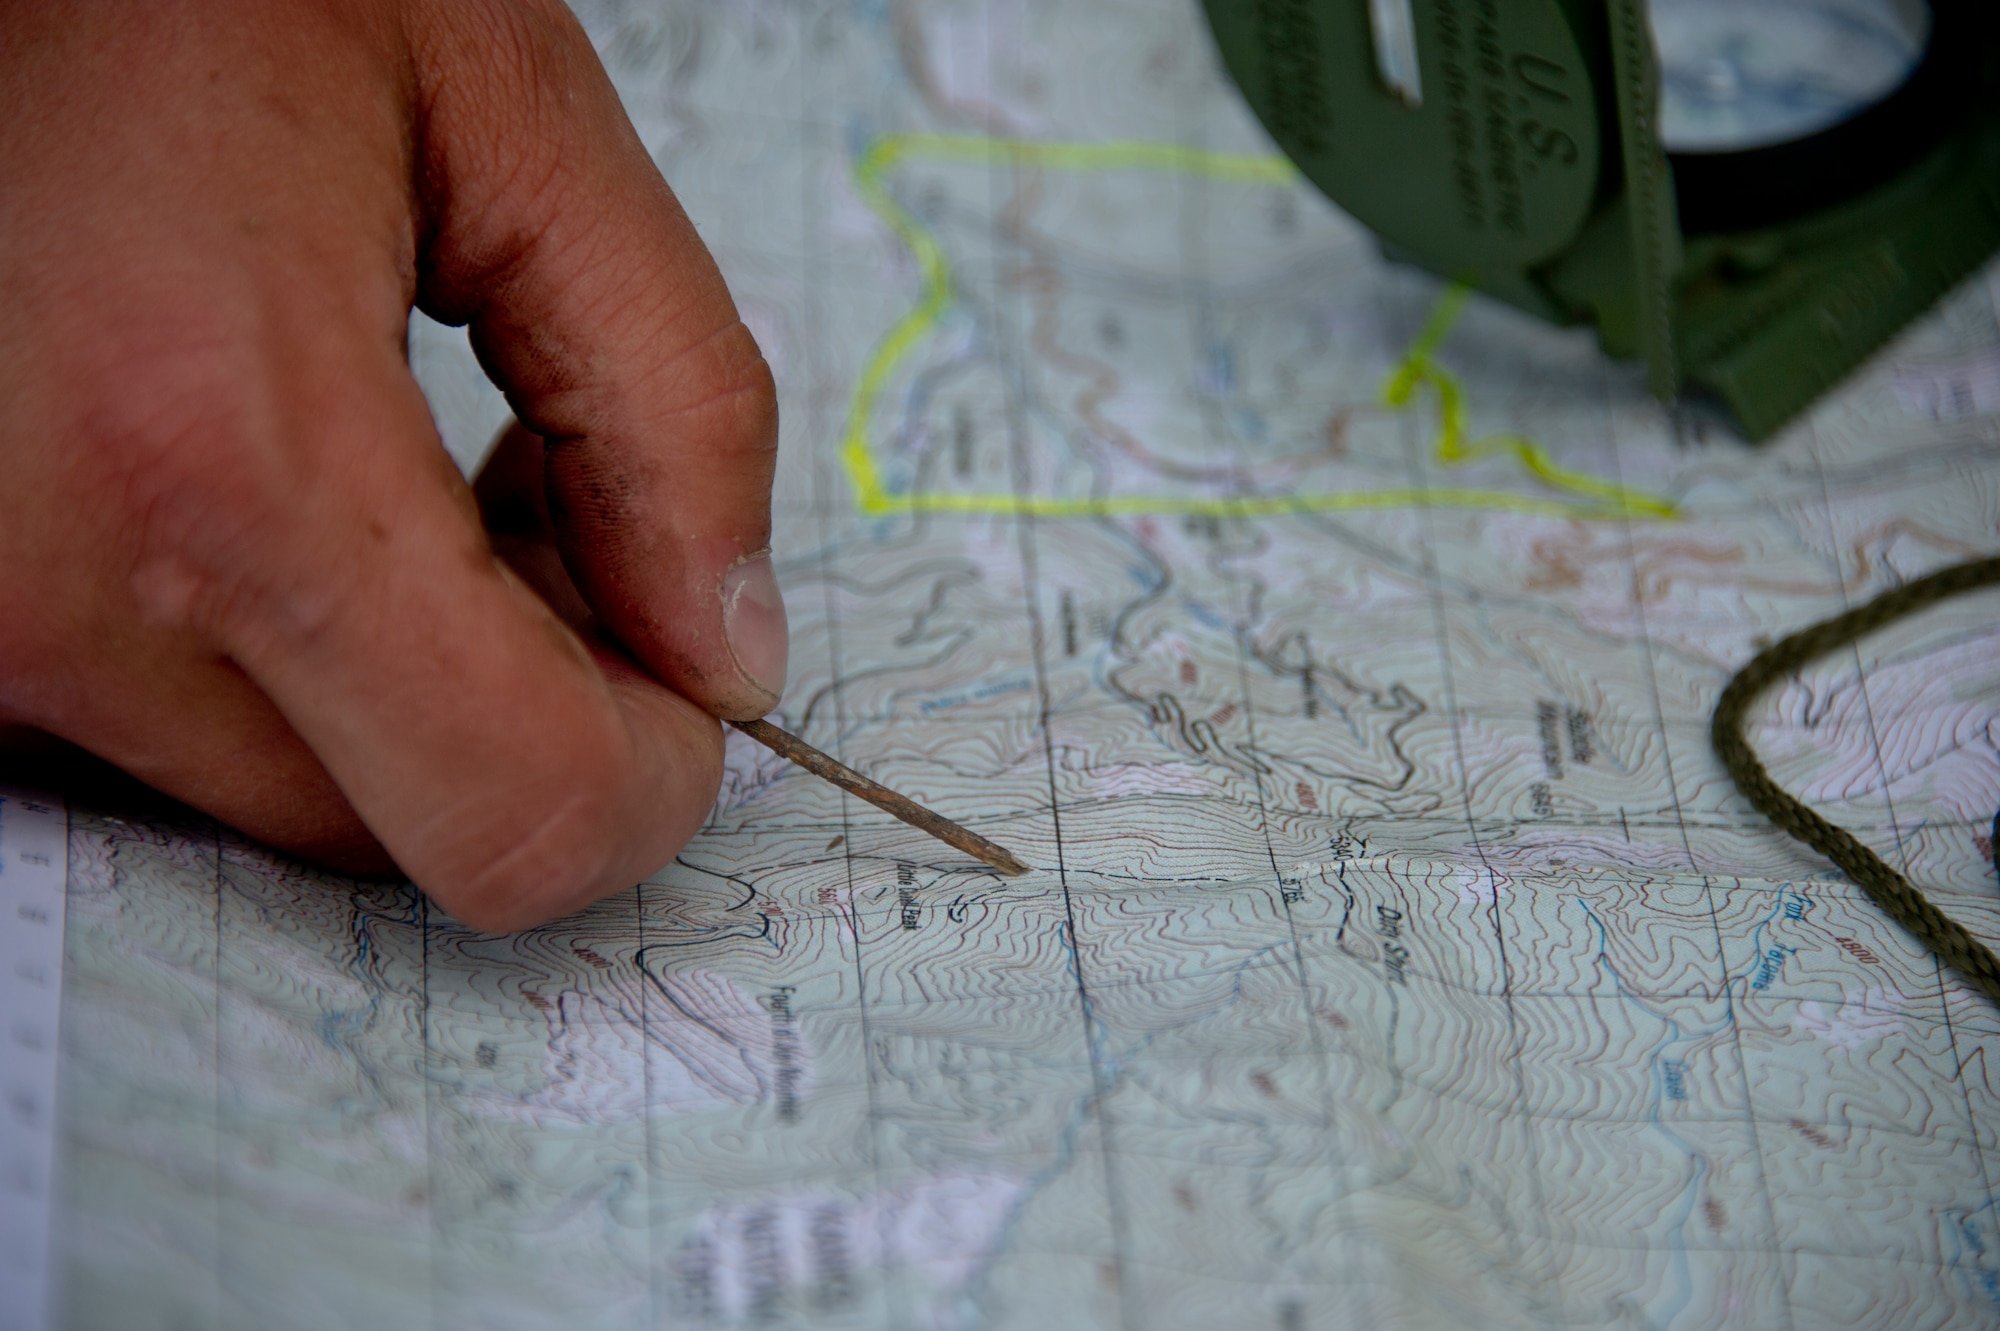 Airman 1st Class Zachary Mikolajczyk, 22nd Training Squadron Survival, Evasion, Resistance and Escape specialist, points at a location on a field training area map June 13, 2015, in the Colville National Forest, Wash. Mikolajczyk showed the S-V-80-A combat survival students how to find their location on a map. The students learned a variety of skills to include fire crafts, water procurement, land navigation and shelter building. (U.S. Air Force photo/Airman 1st Class Nicolo J. Daniello)